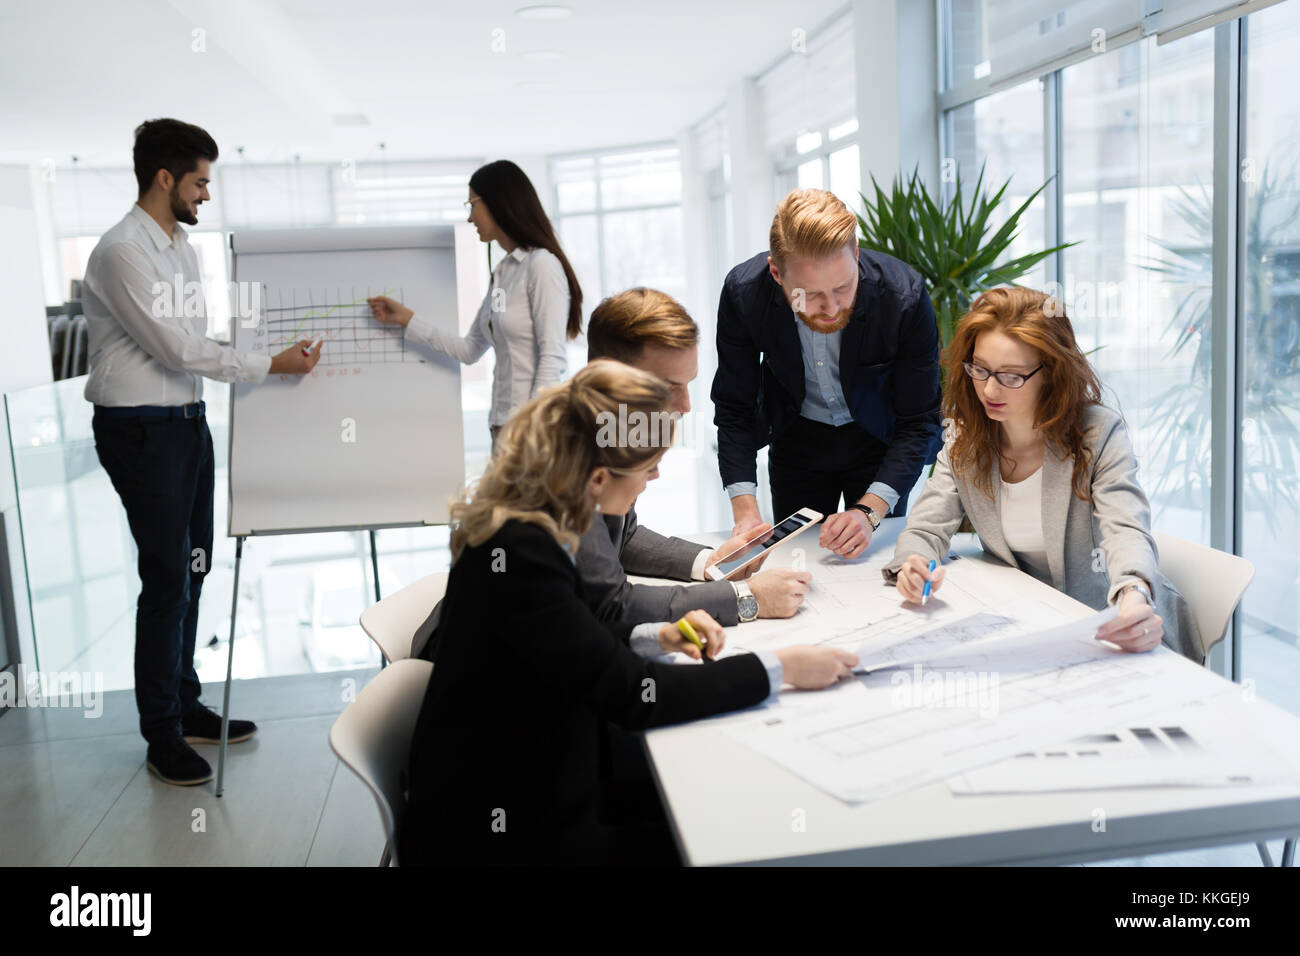 Team of architects working together on project Stock Photo